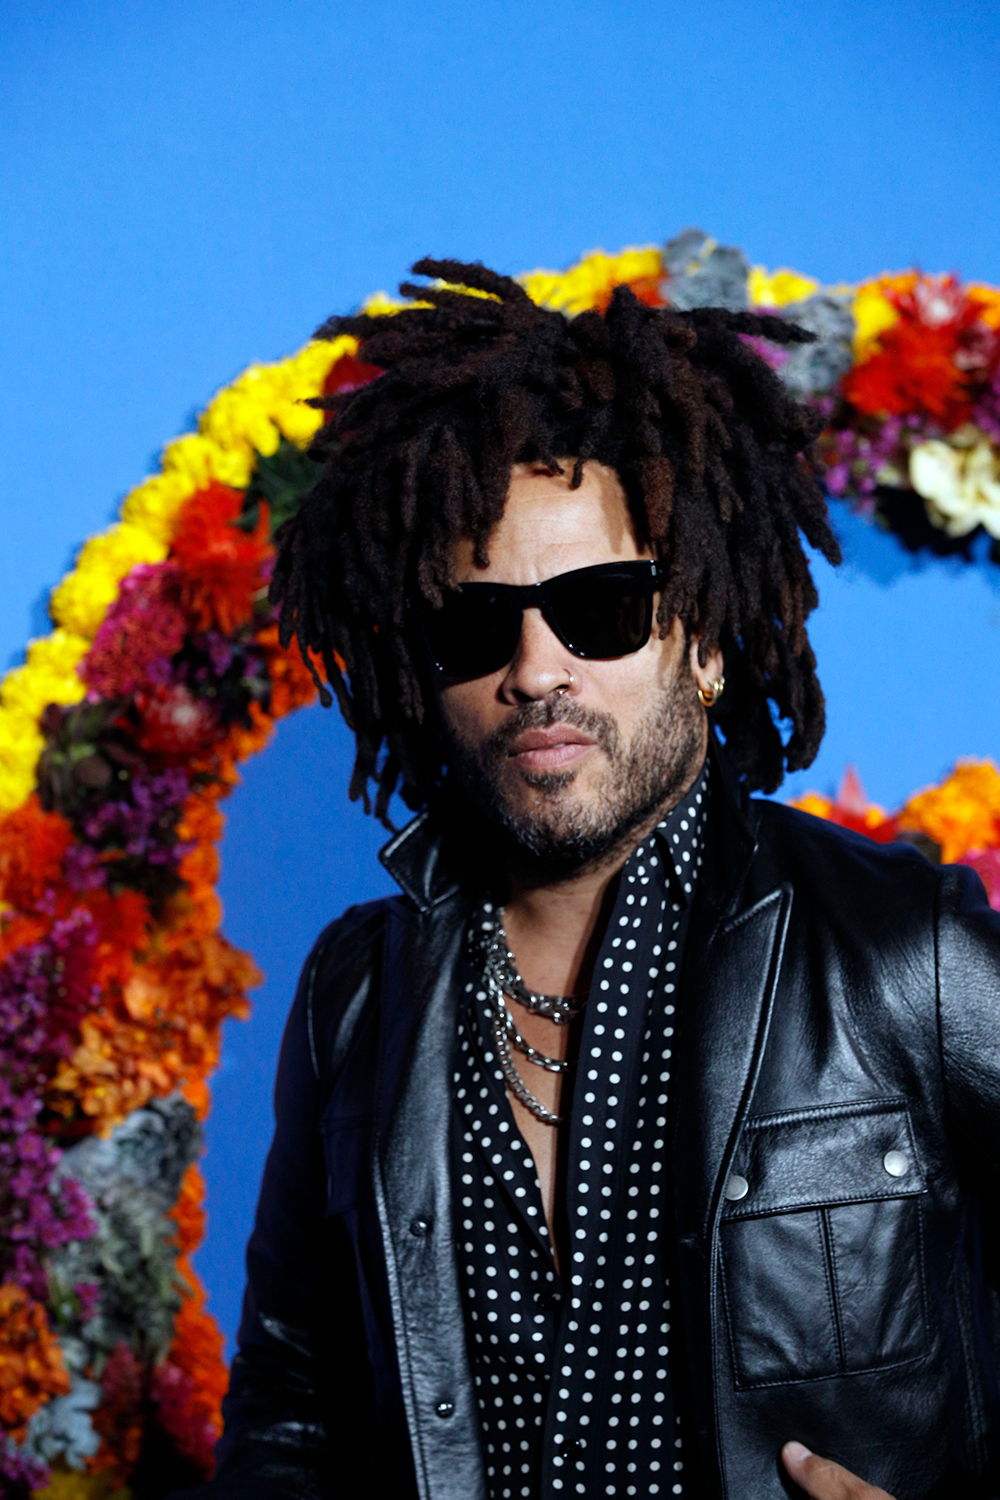 <p>Lenny Kravitz attends the opening season gala at Opera Garnier in Paris on Sep. 21, 2017. He wore his standard leather jacket and a polka dot shirt.</p>